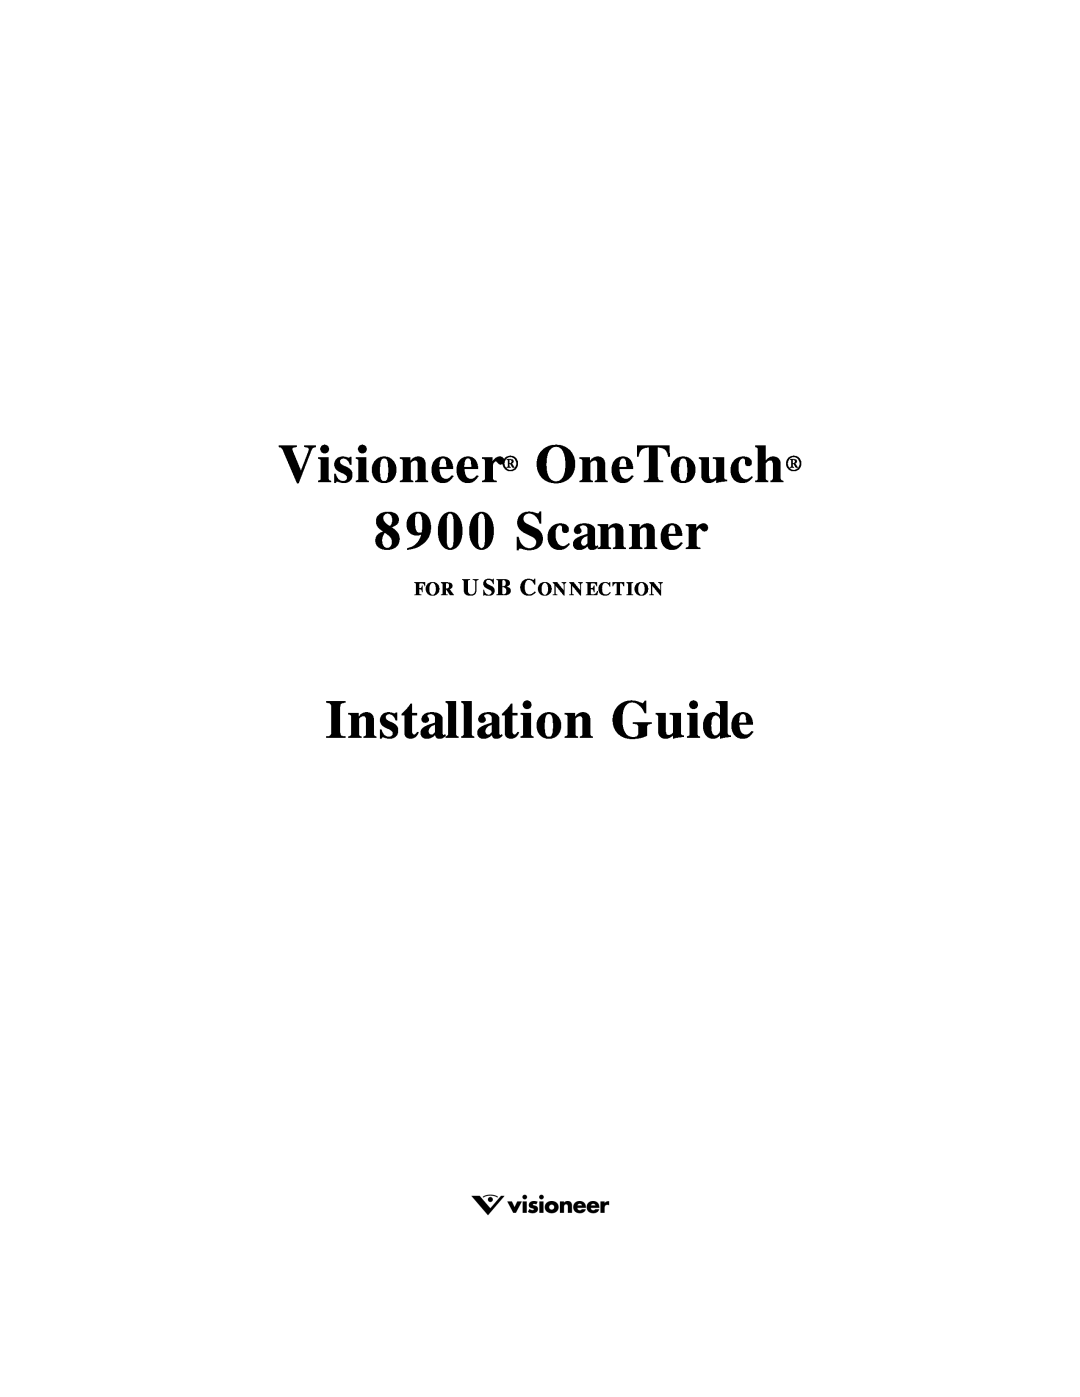 Visioneer manual Visioneer OneTouch 8900 Scanner, Installation Guide, For Usb Connection 